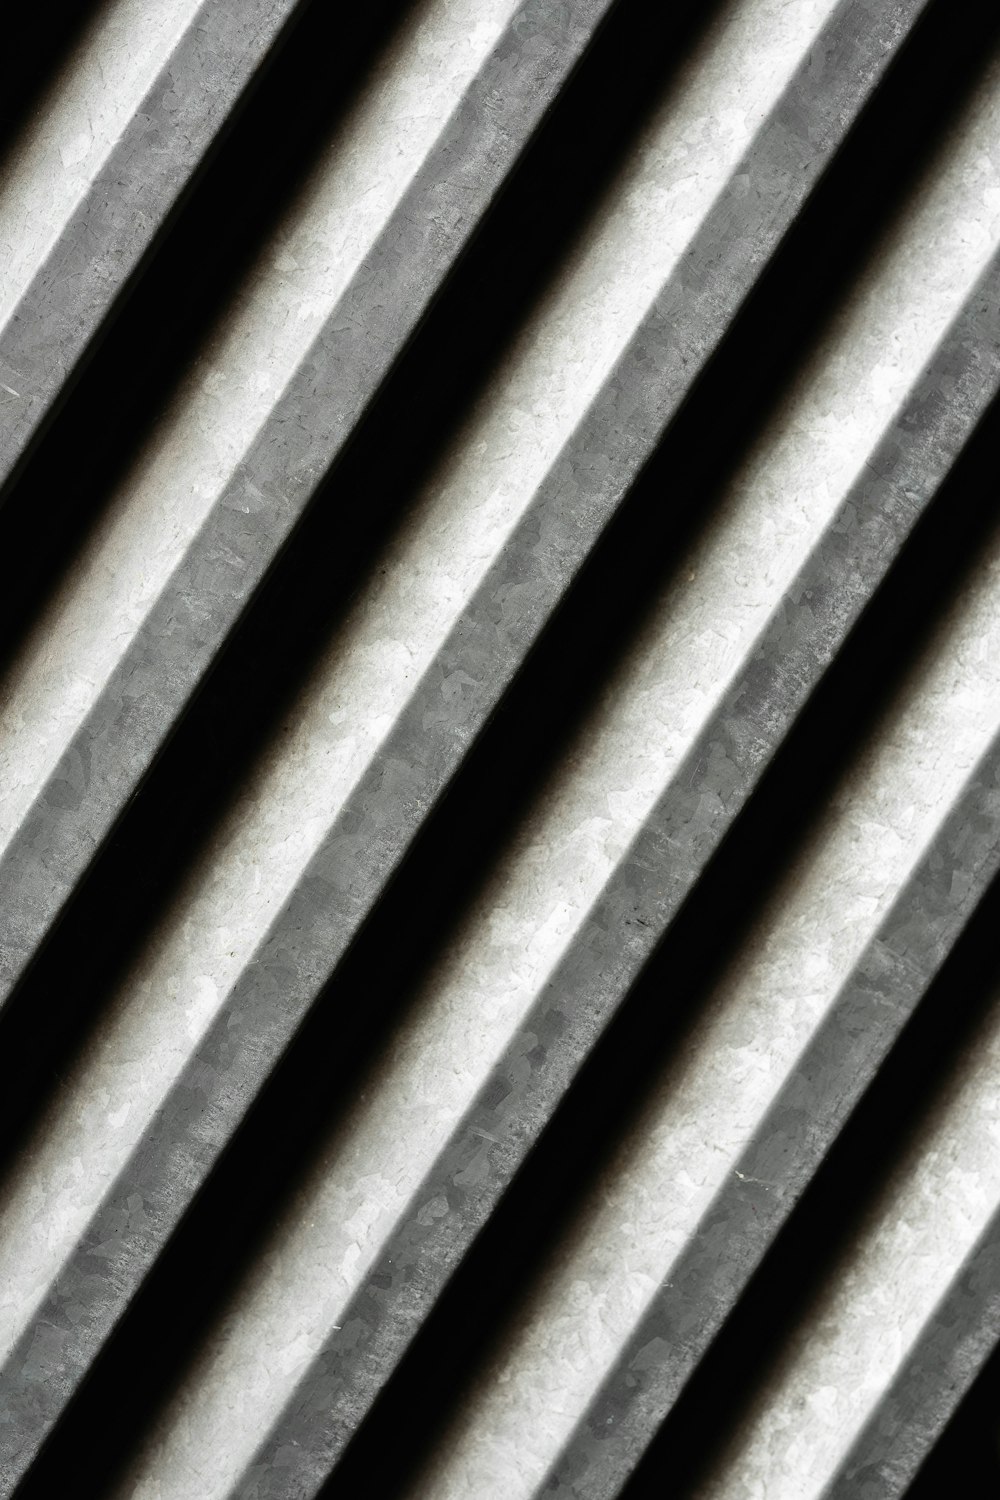 a black and white photo of metal bars